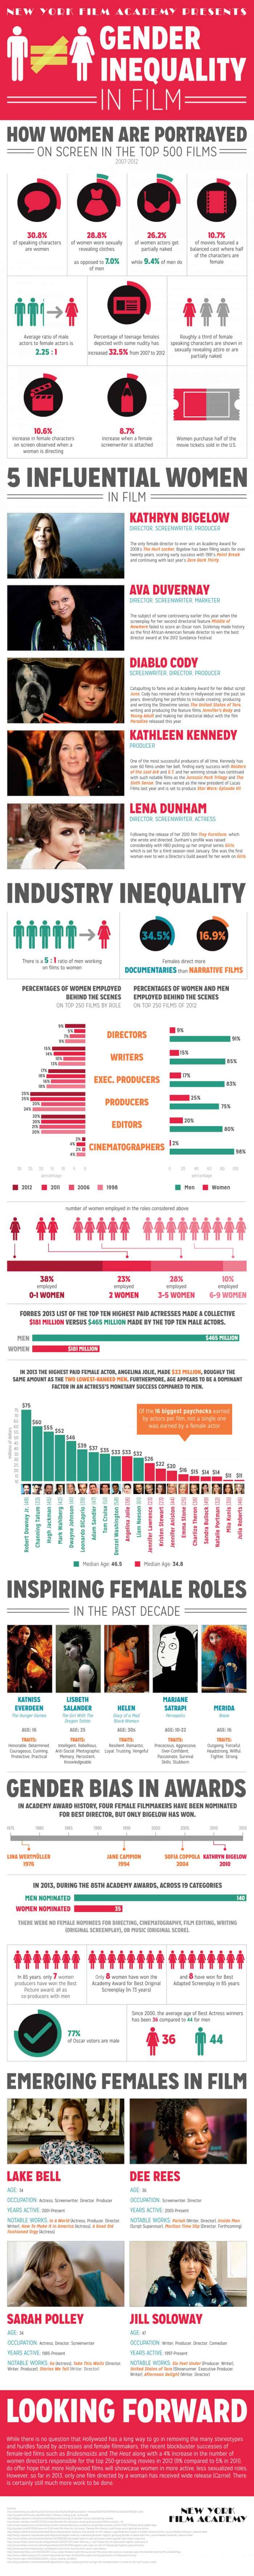 Gender Inequality in Film Infographic